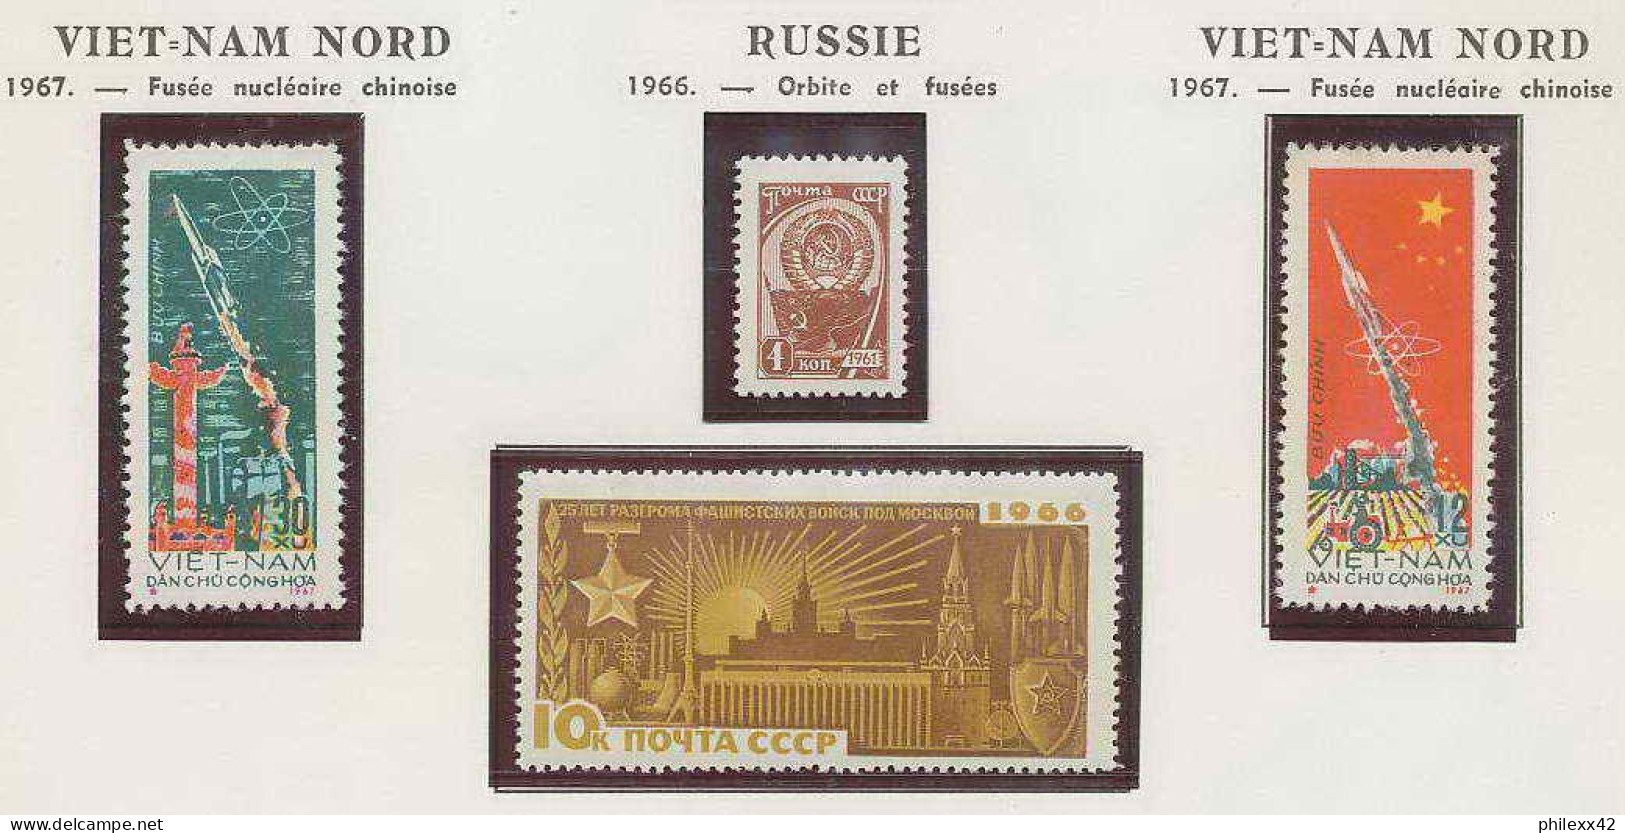 1154/ Espace (space) ** MNH Lot A Voir Russie (Russia Urss USSR) - Russia & USSR